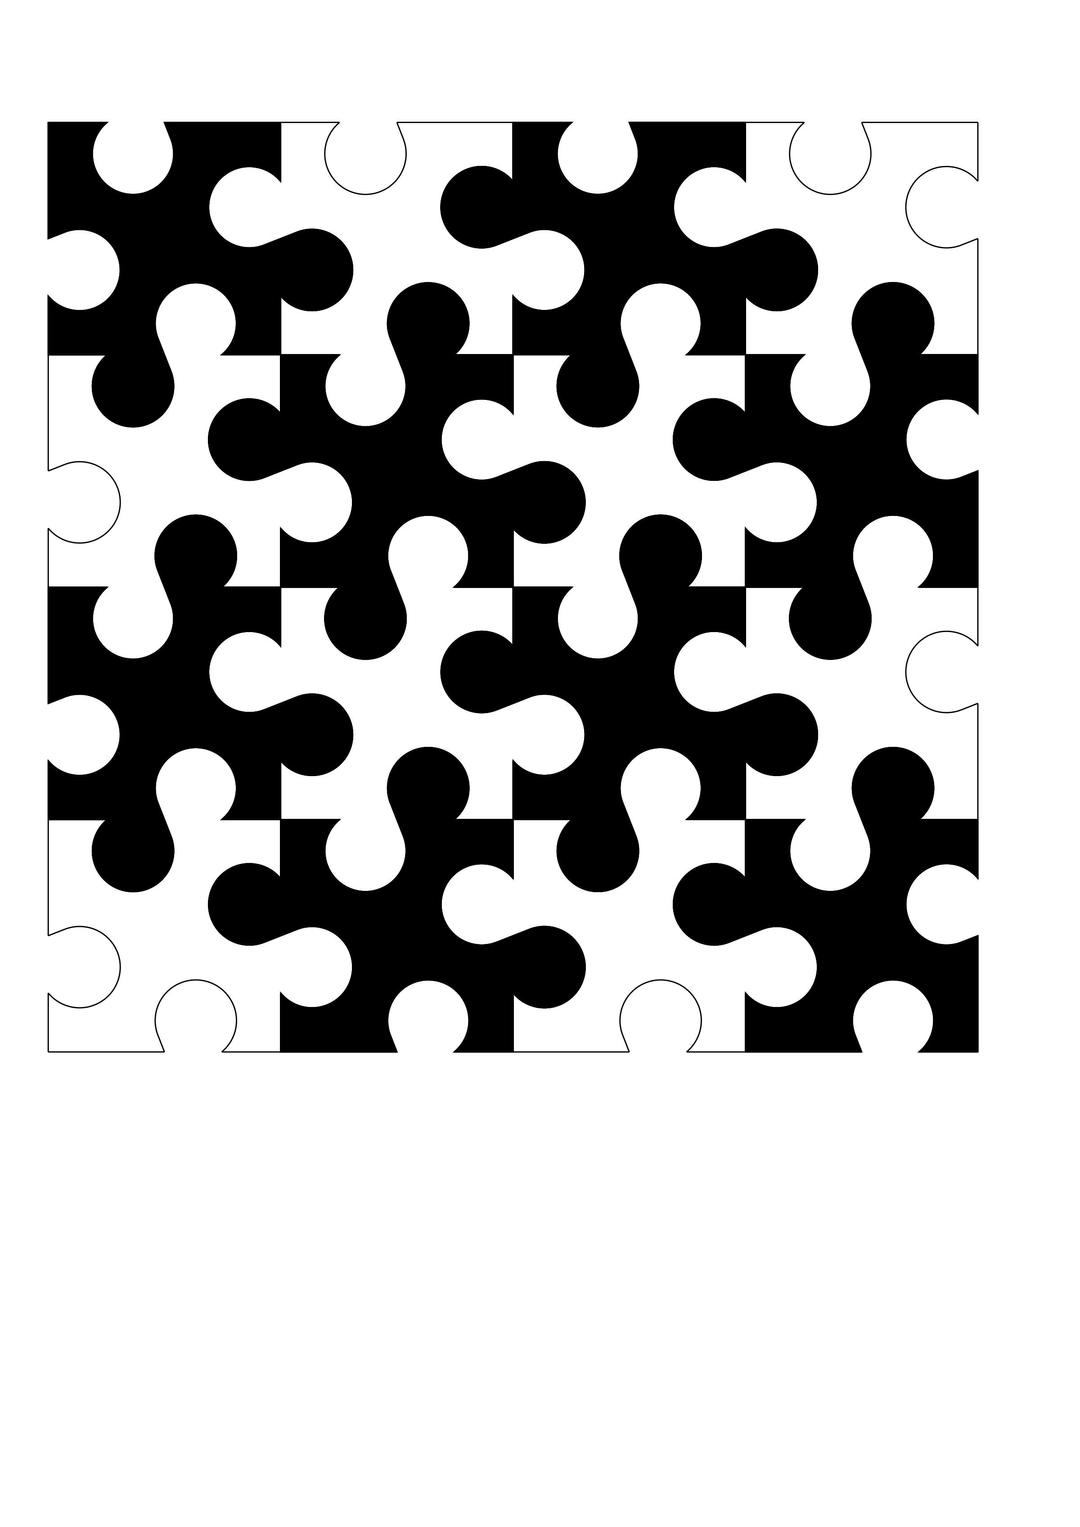 Counterchange pattern allied to the chess board design png transparent